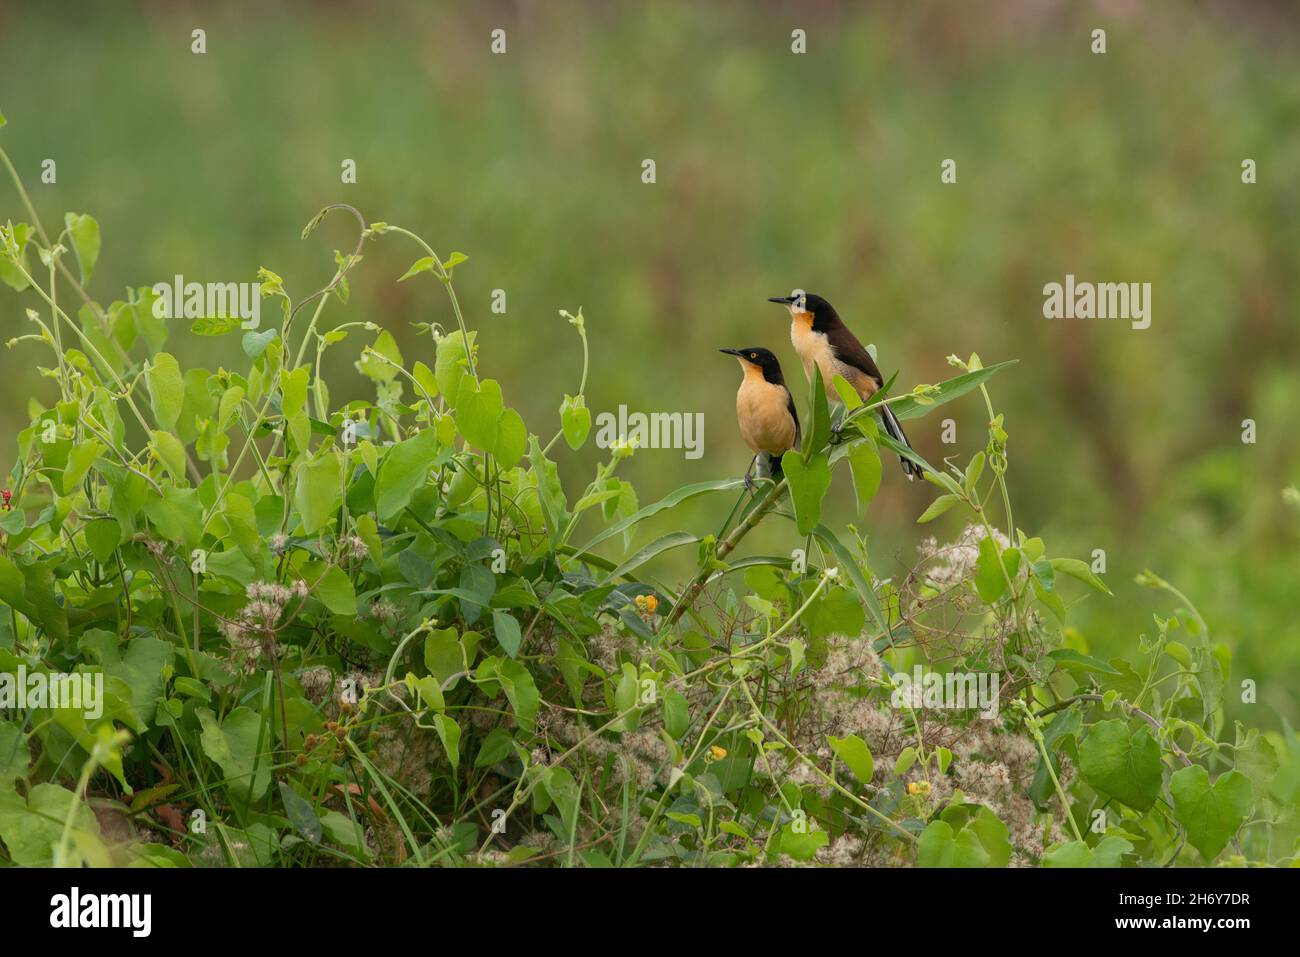 A pair of Black-capped Donacobius (Donacobius atricapilla) on a wetland in the Pantanal, Brazil Stock Photo